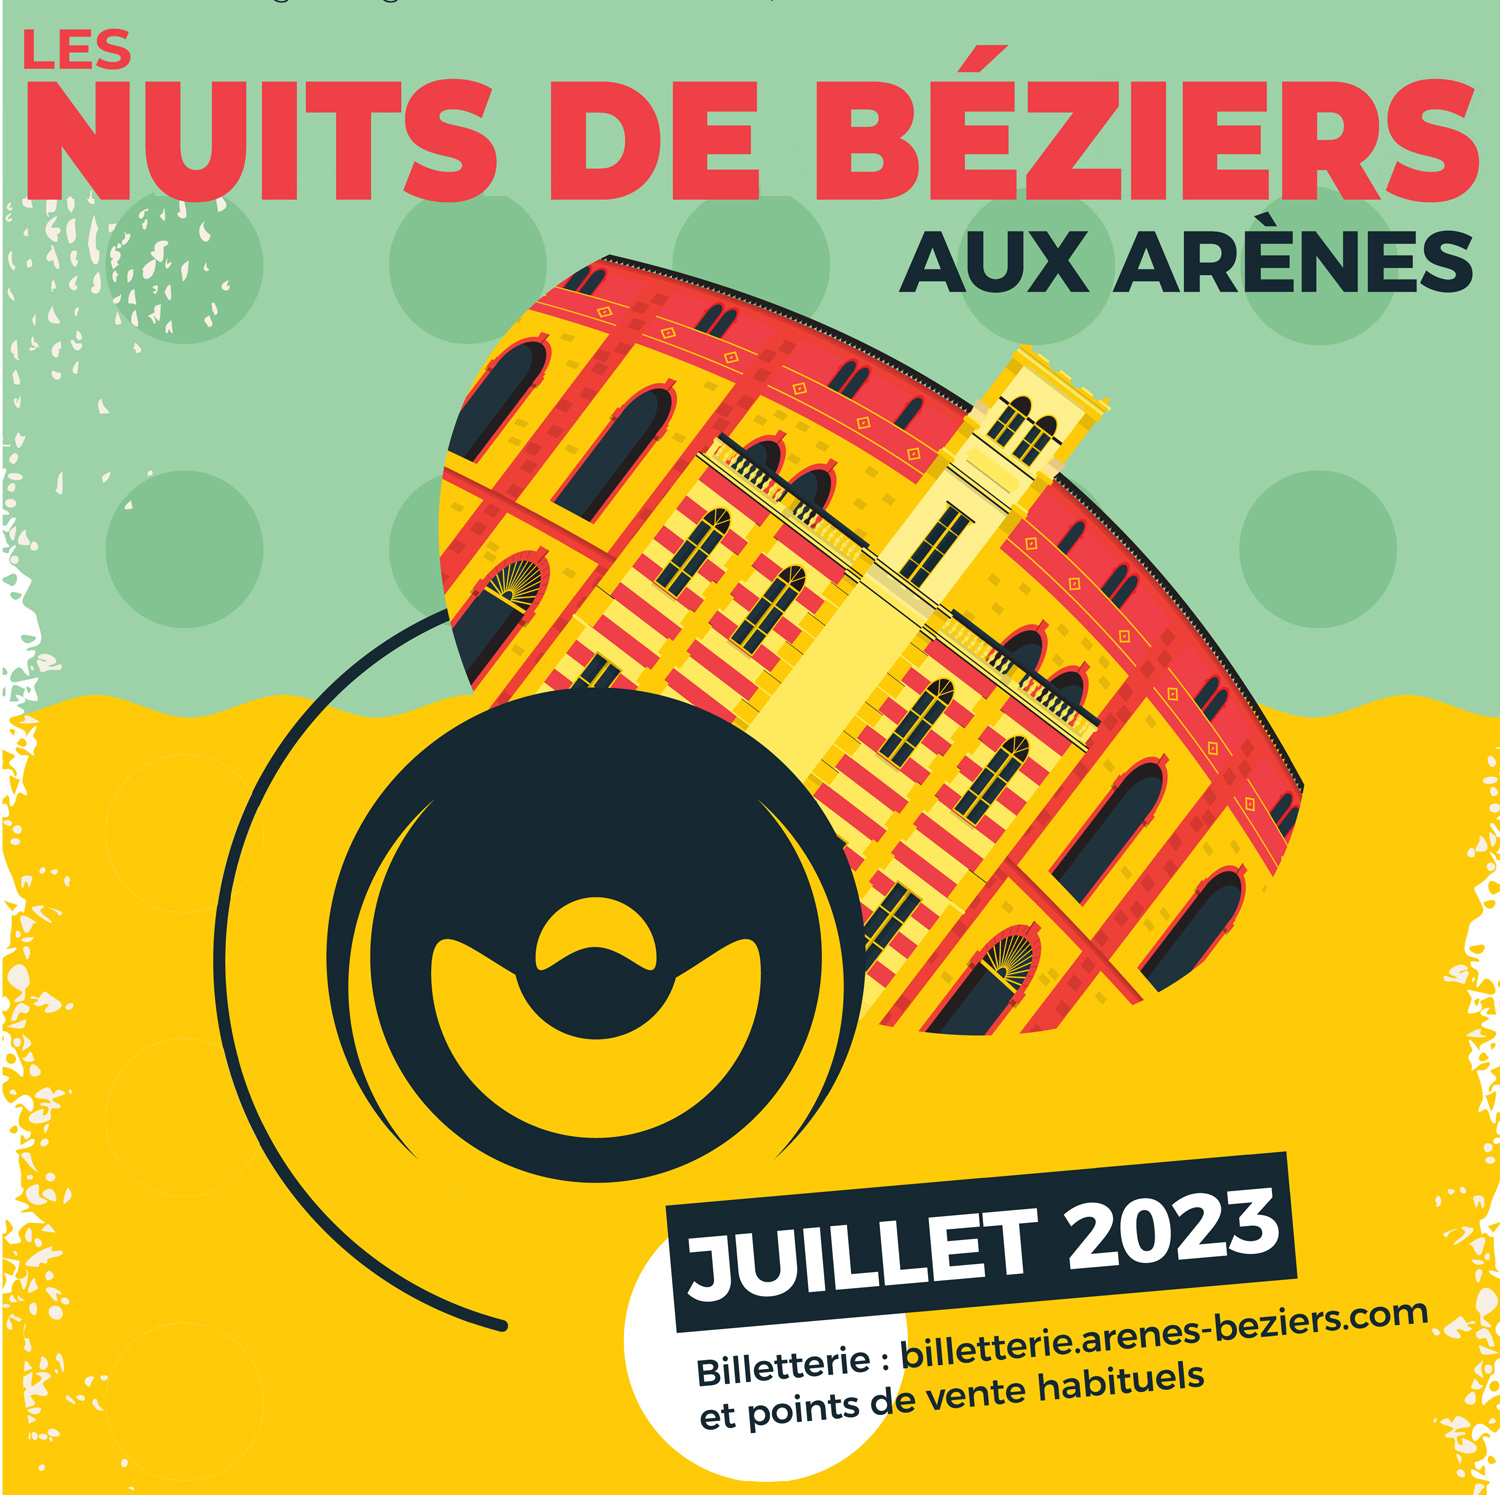 arenes nuits beziers logos